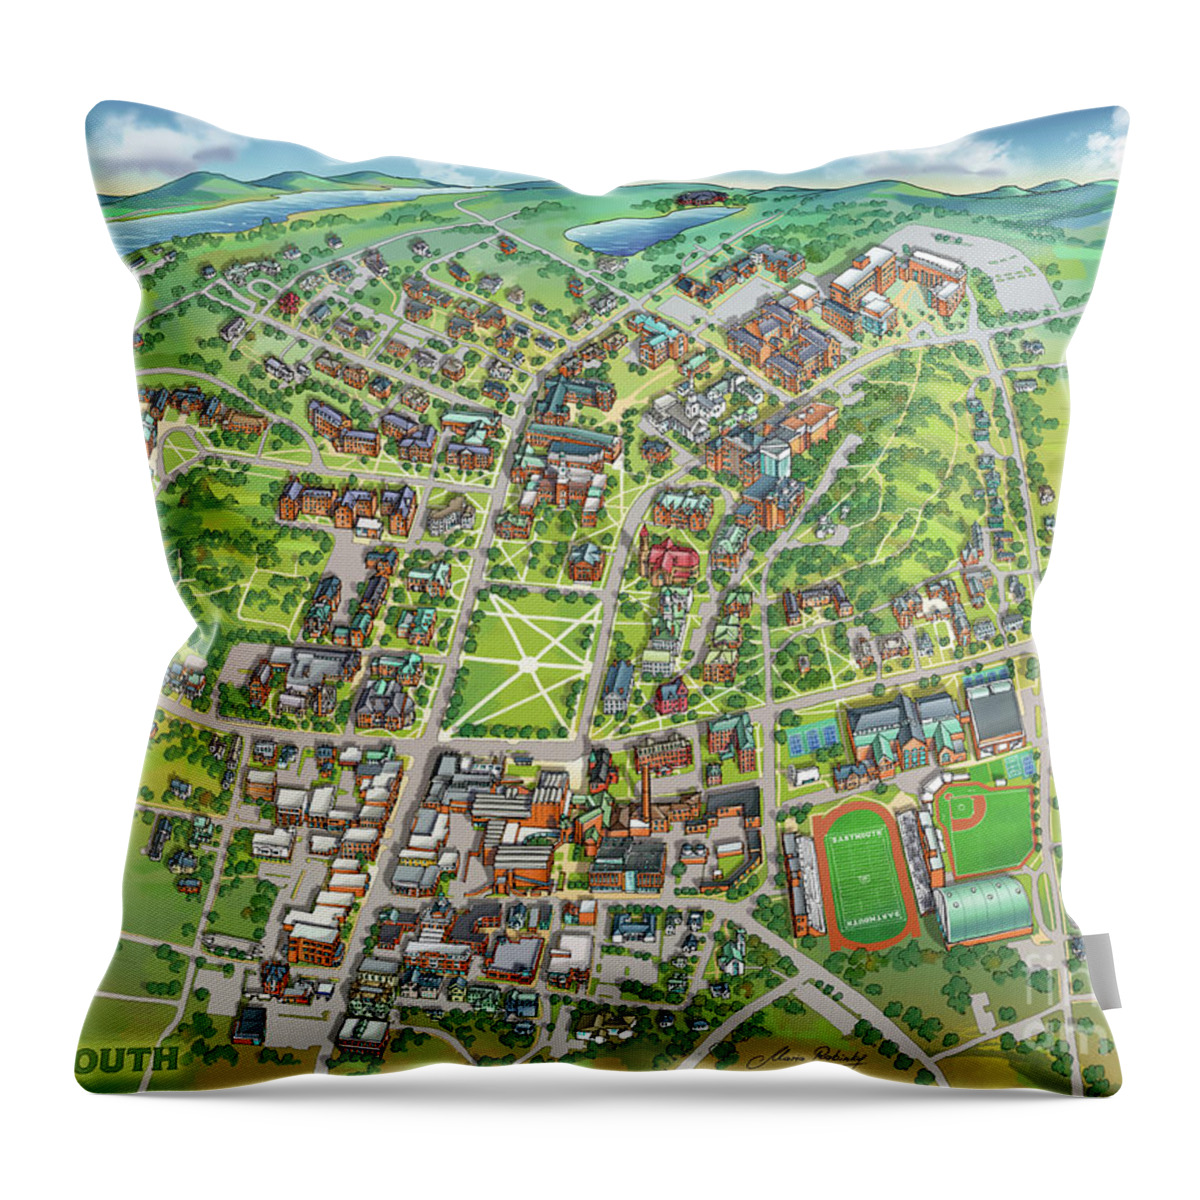 Dartmouth College Throw Pillow featuring the digital art Dartmouth College Campus Map by Maria Rabinky